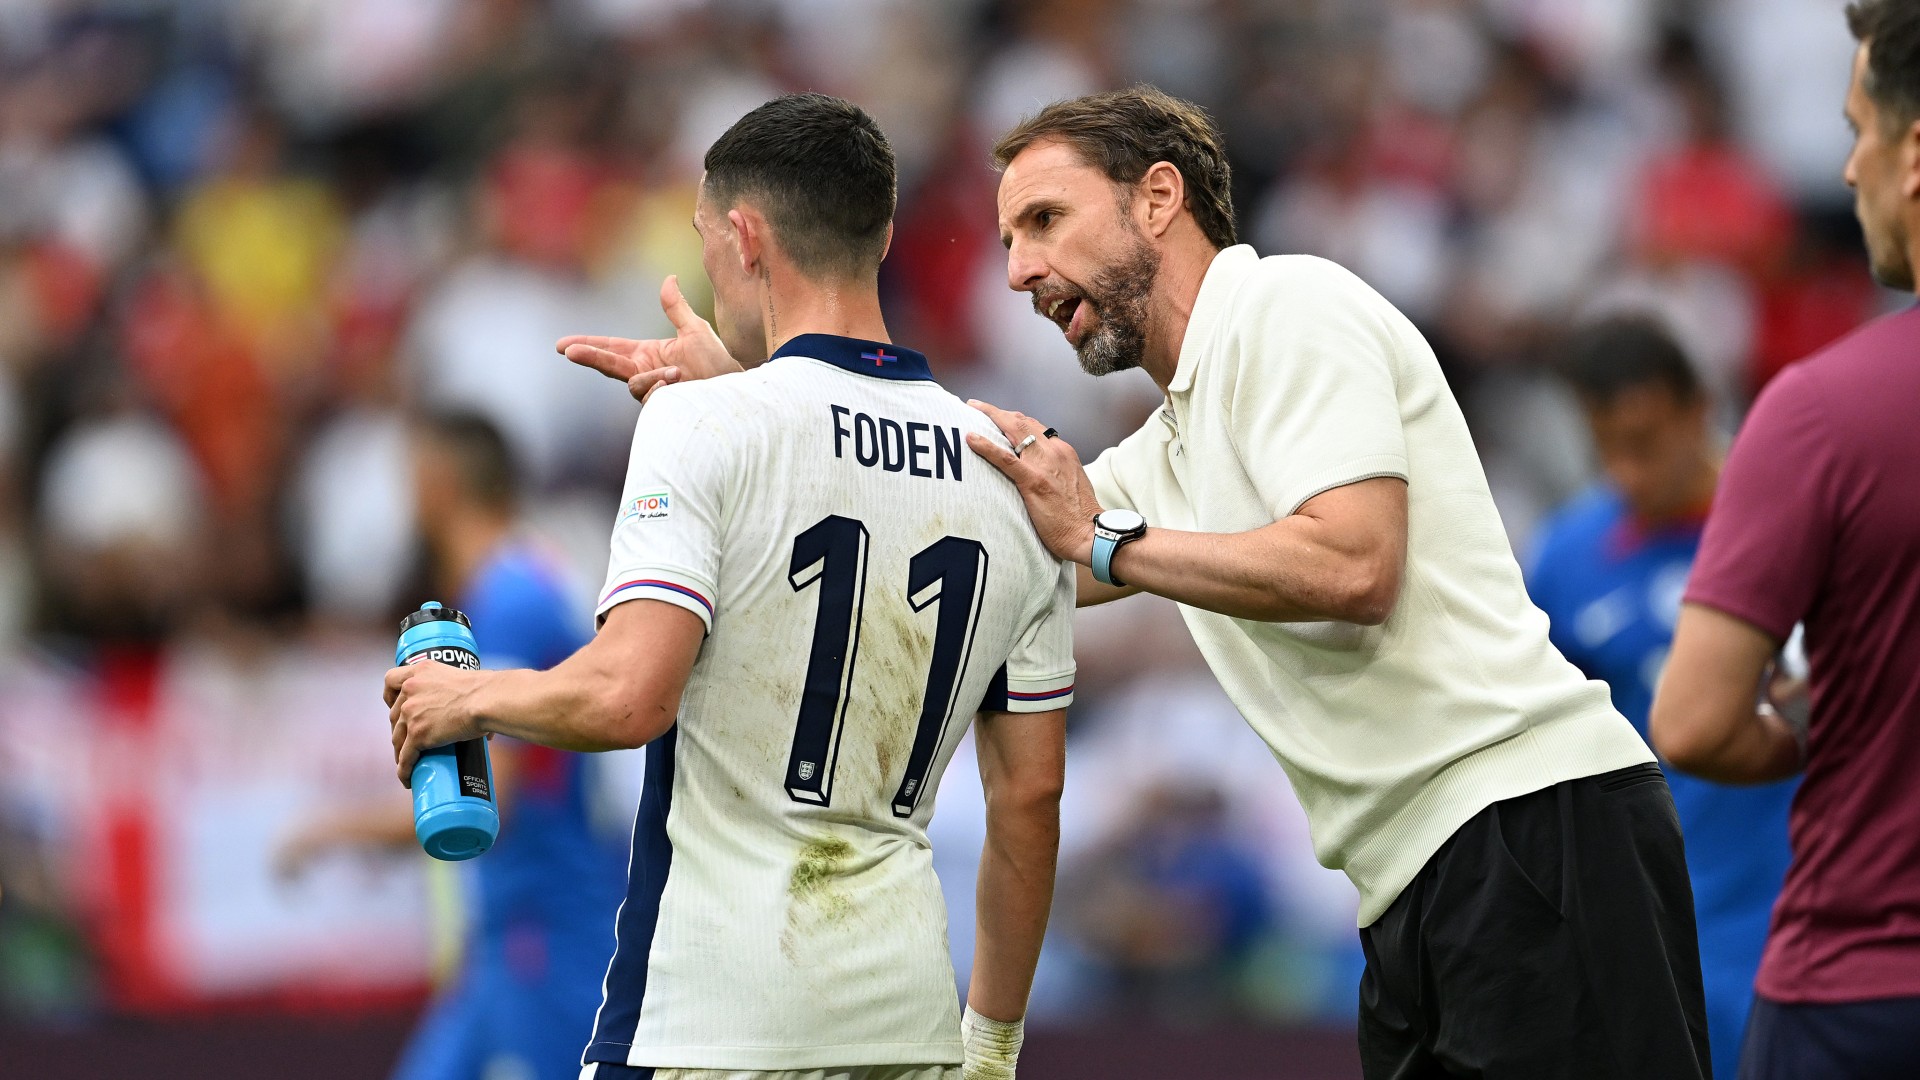 Foden feels sorry for Southgate